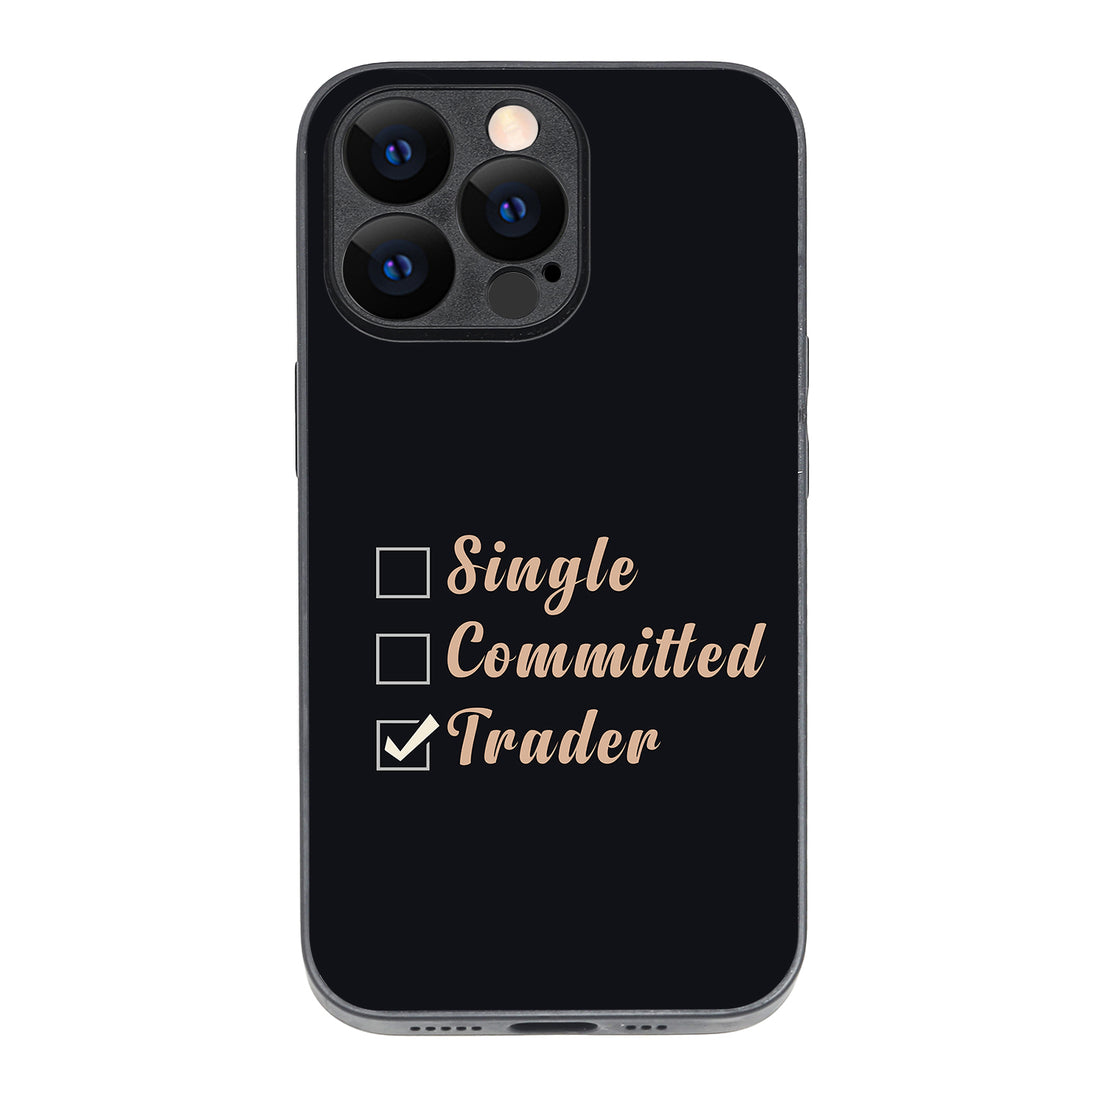 Single, Commited, Trader Trading iPhone 13 Pro Case